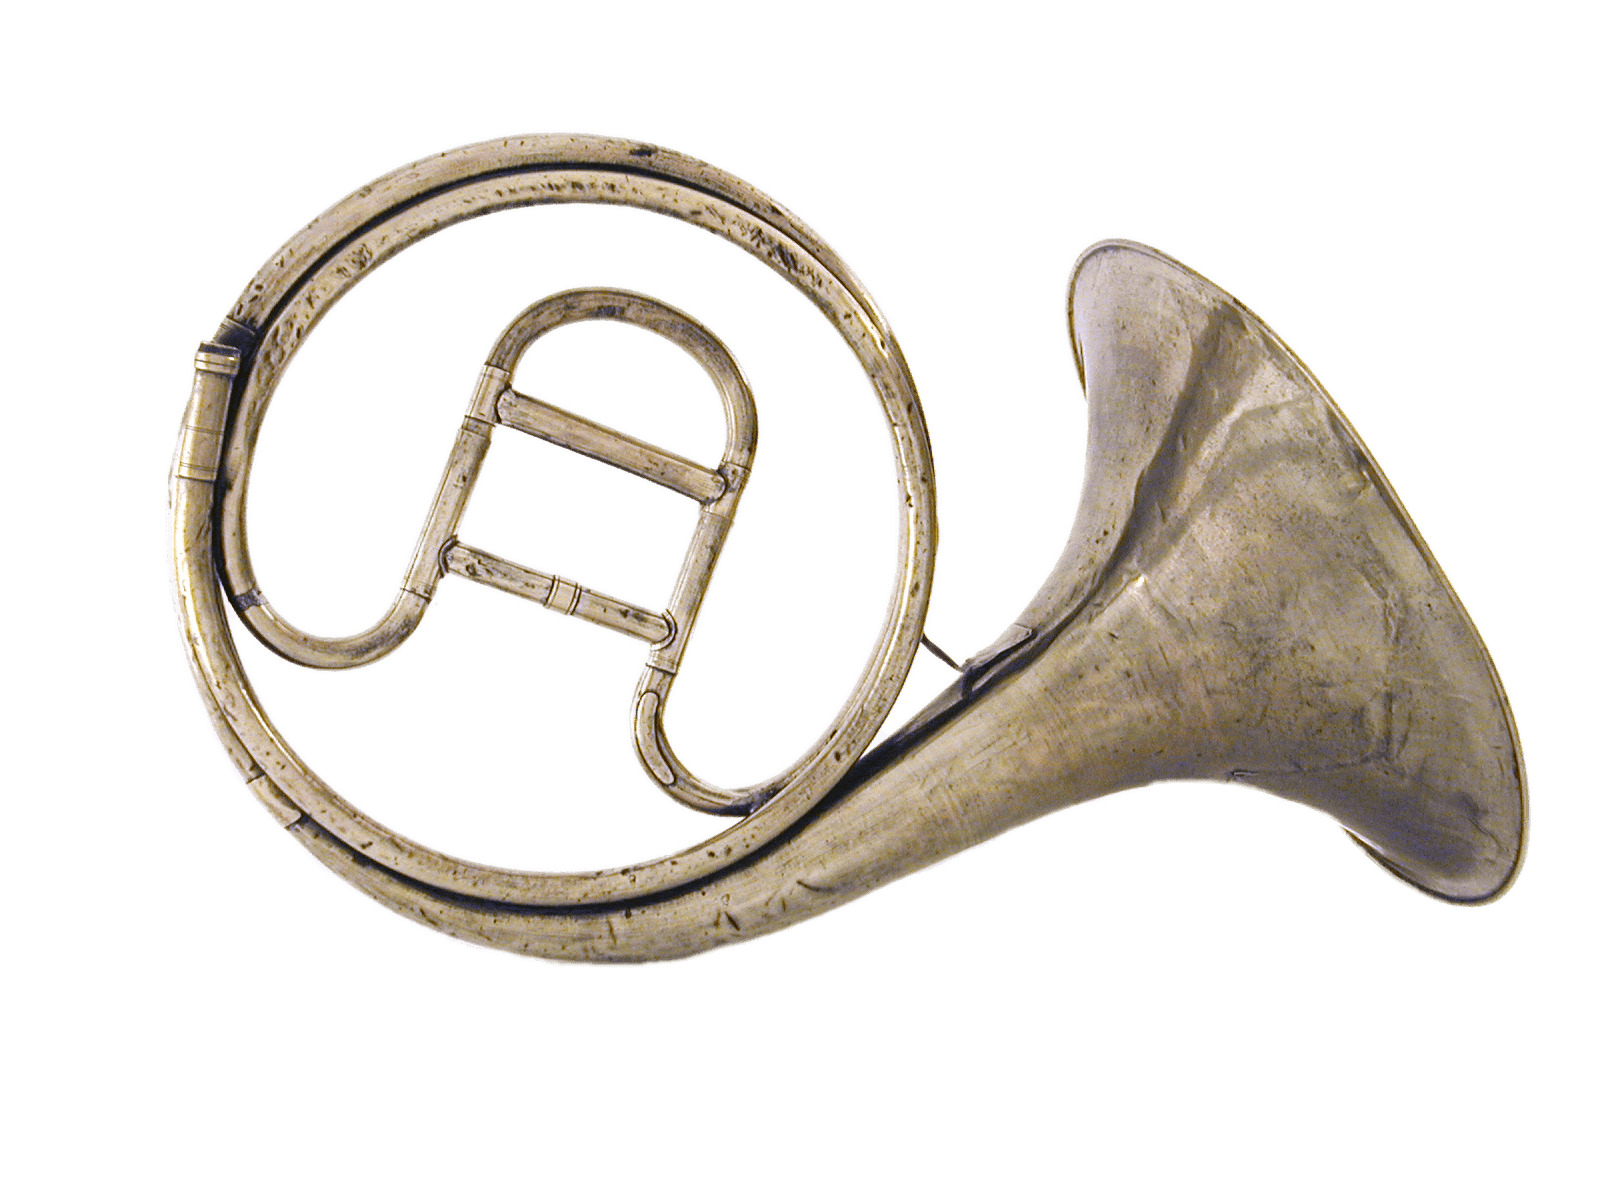 German Horn icons